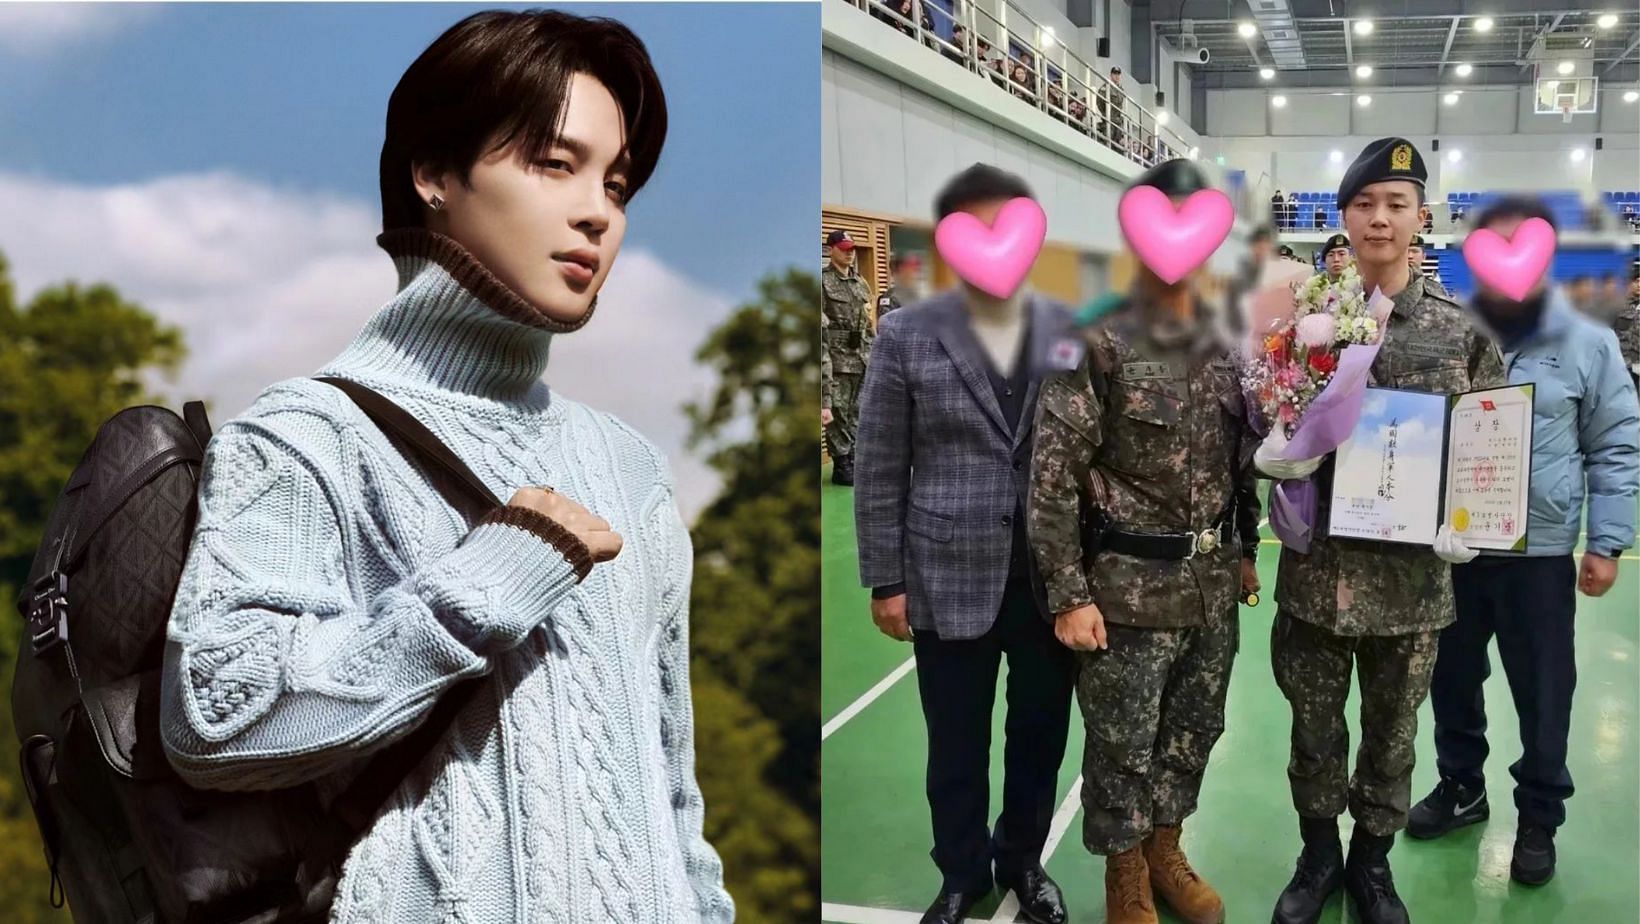 Fellow recruit reveals BTS Jimin giving up his cell phone time to help other soldiers. (Images via Instagram/@magnate_official_, @j.m)